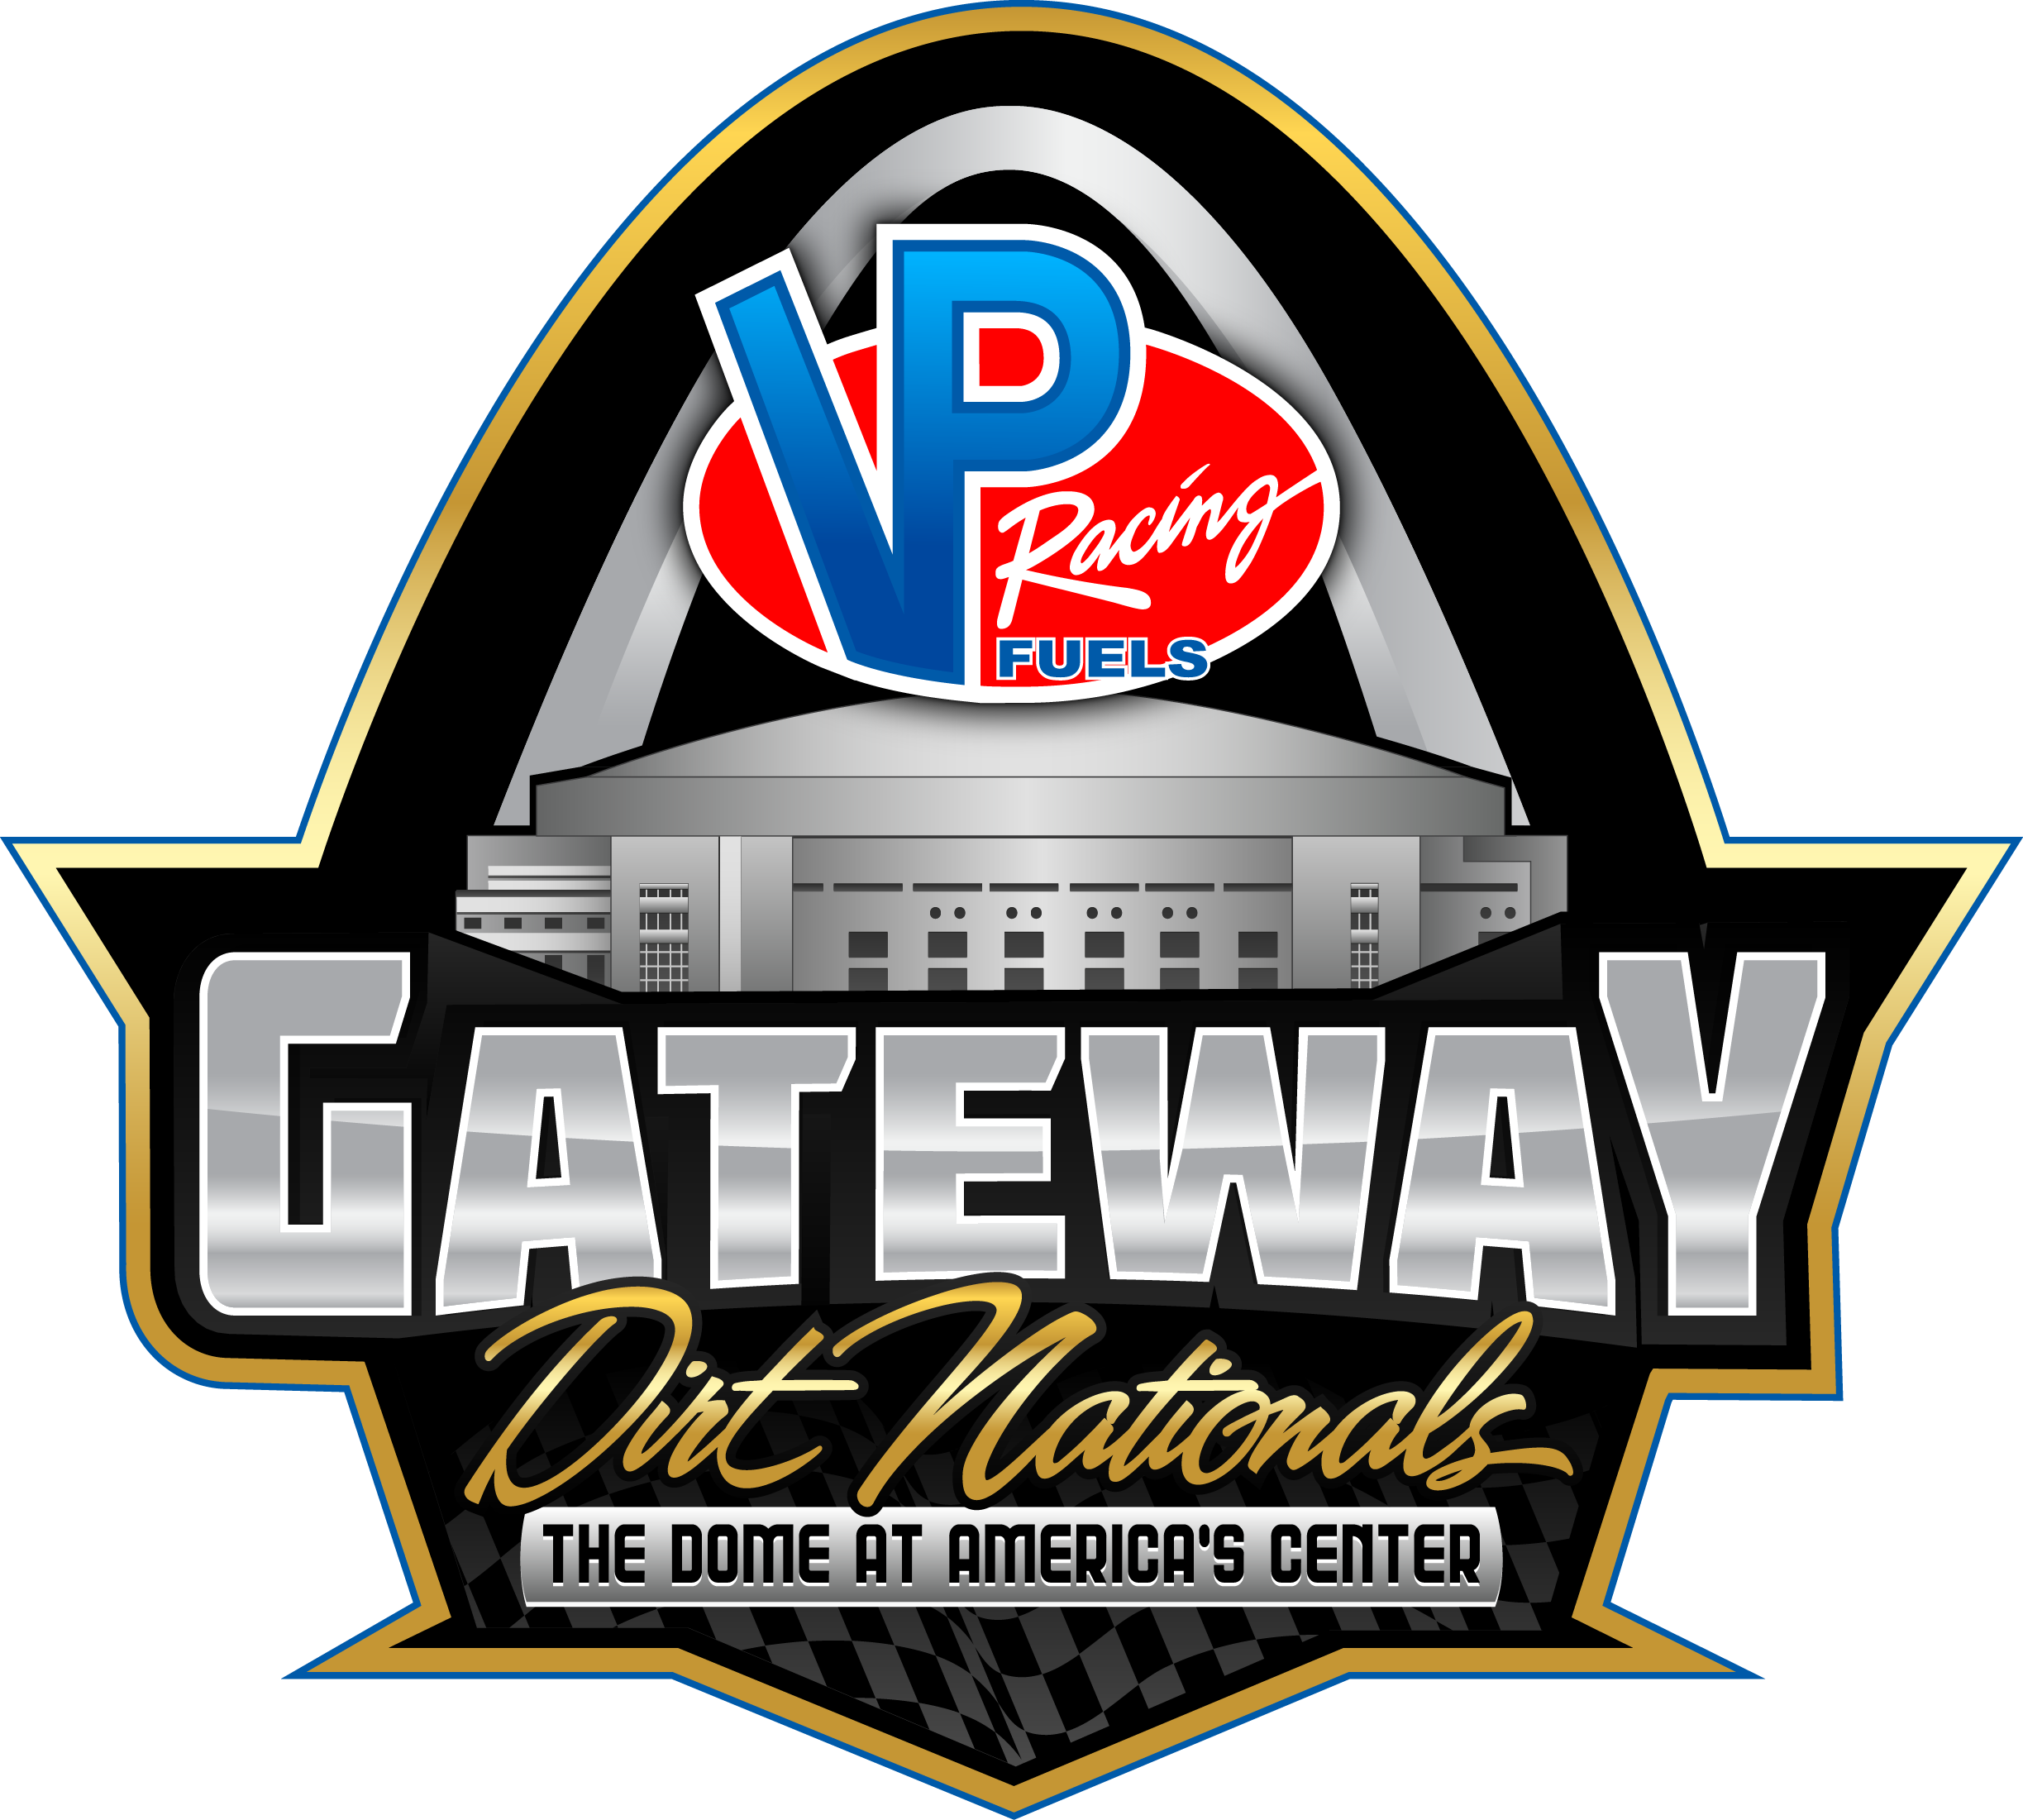 Vp Racing Fuels Inks Multi-year Title Partnership With - Vp Racing Fuels Gateway Dirt Nationals (2447x2201)